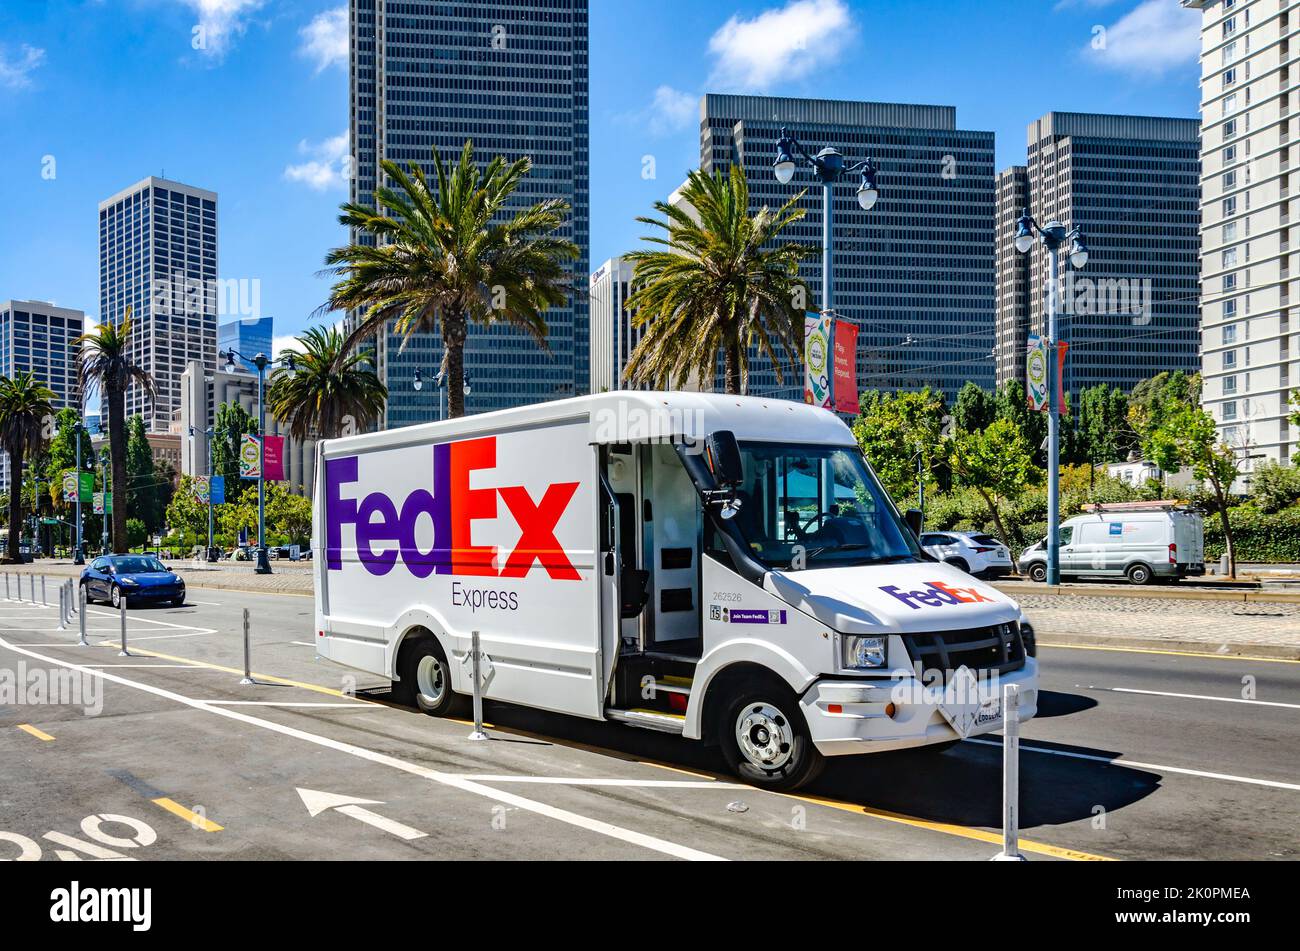 A white FedEx courier delivery van on The Embarcadero in San Francisco, California in front of tall tower blocks and palm trees. Stock Photo